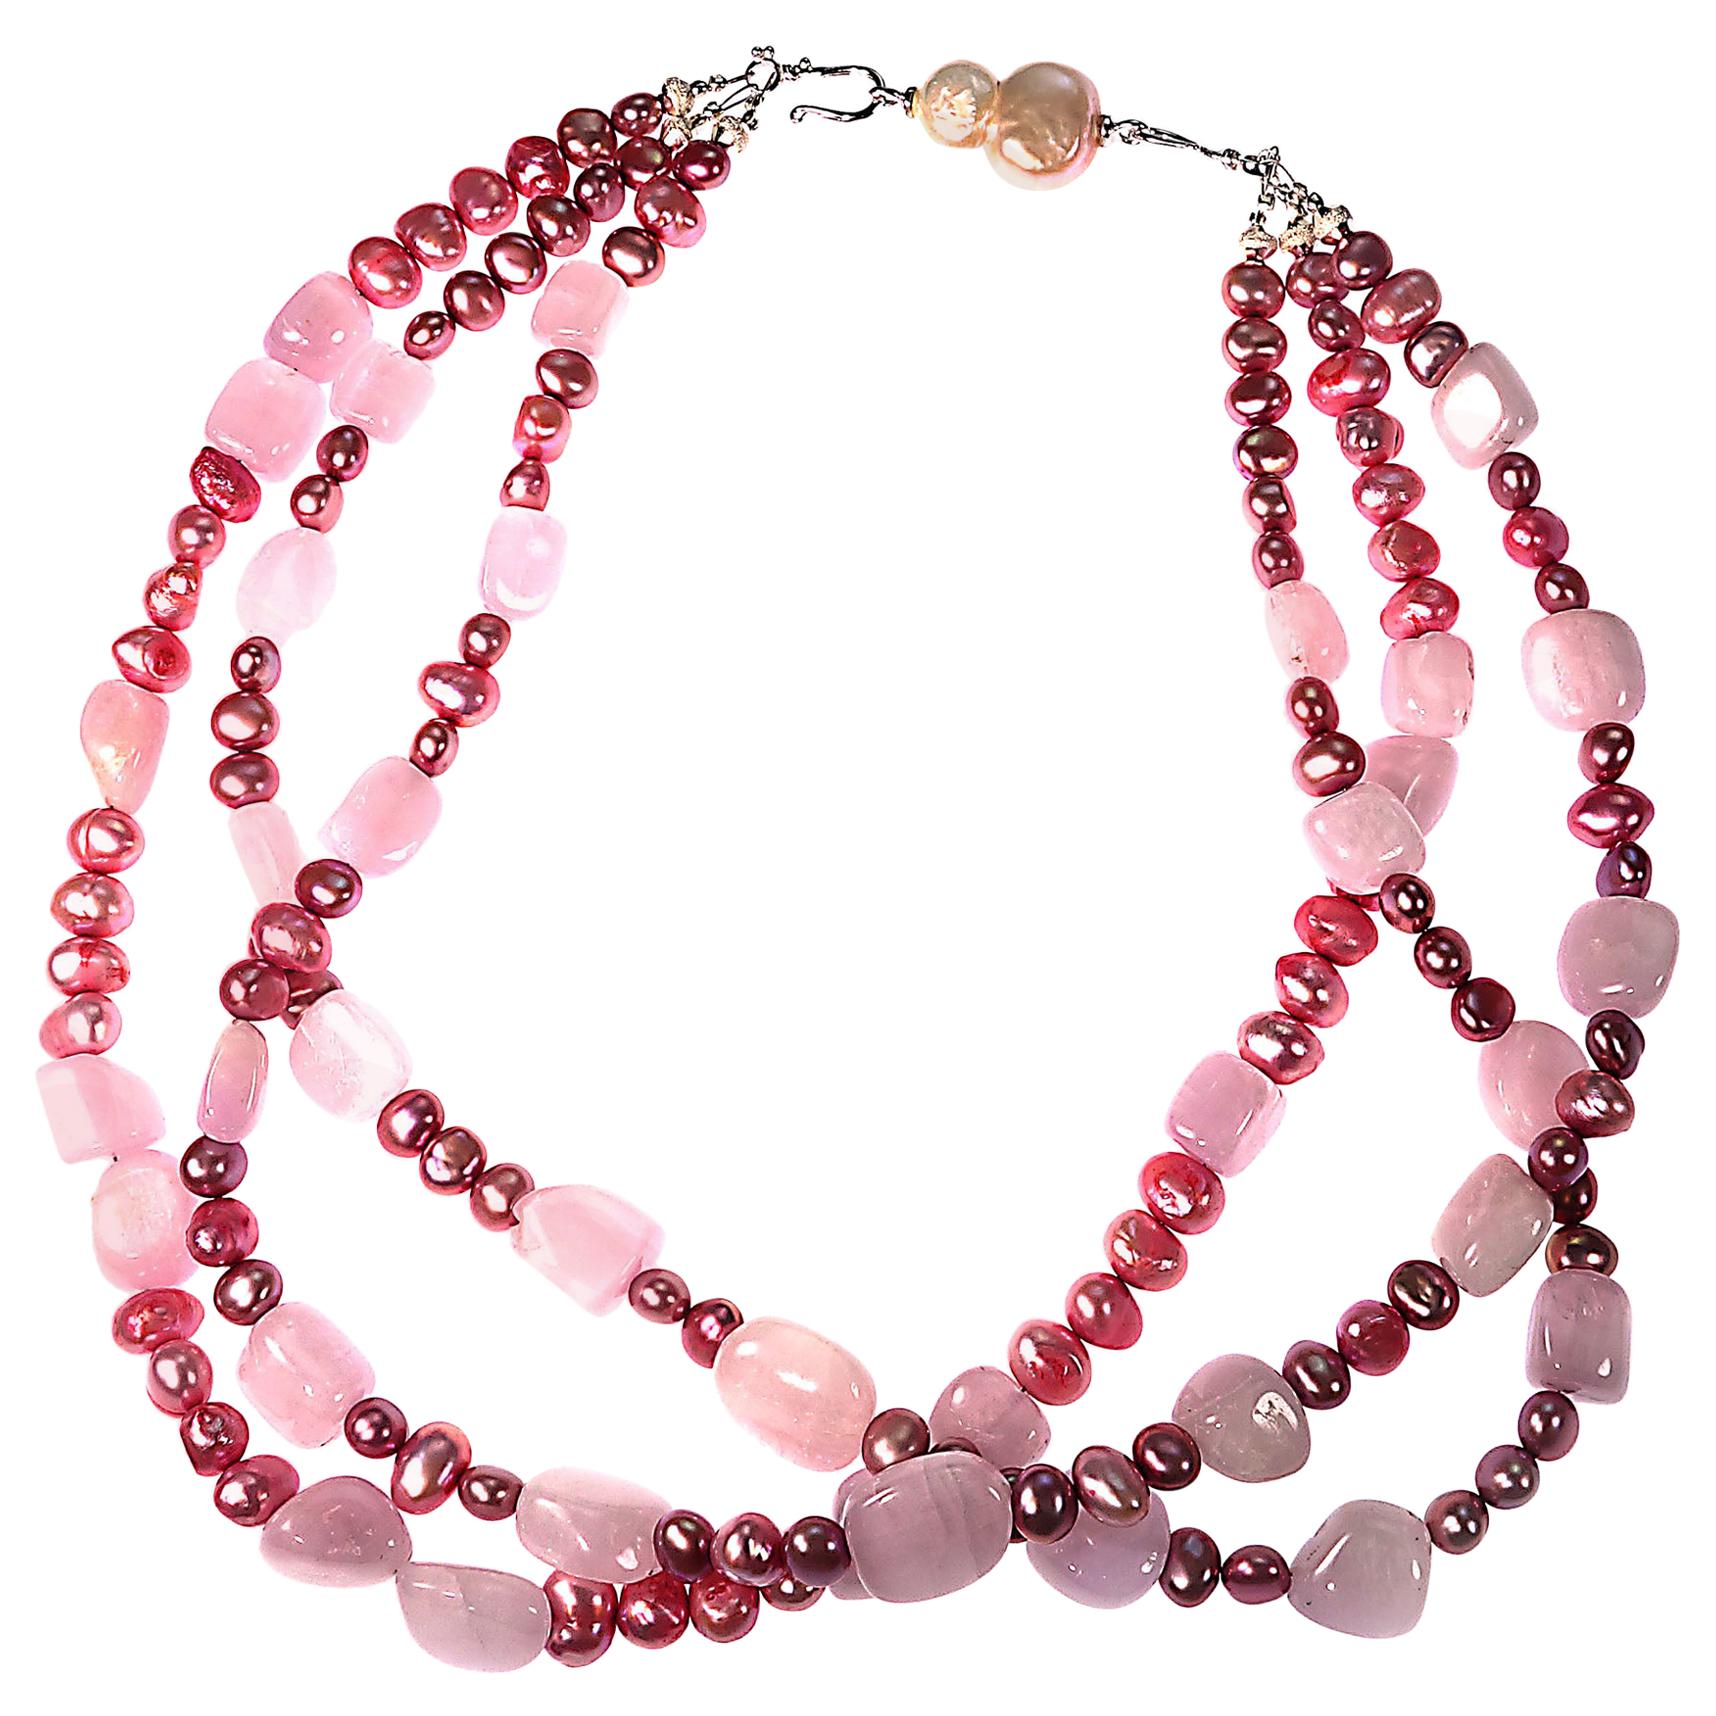 Triple Strand Pink Pearl and Kunzite Necklace